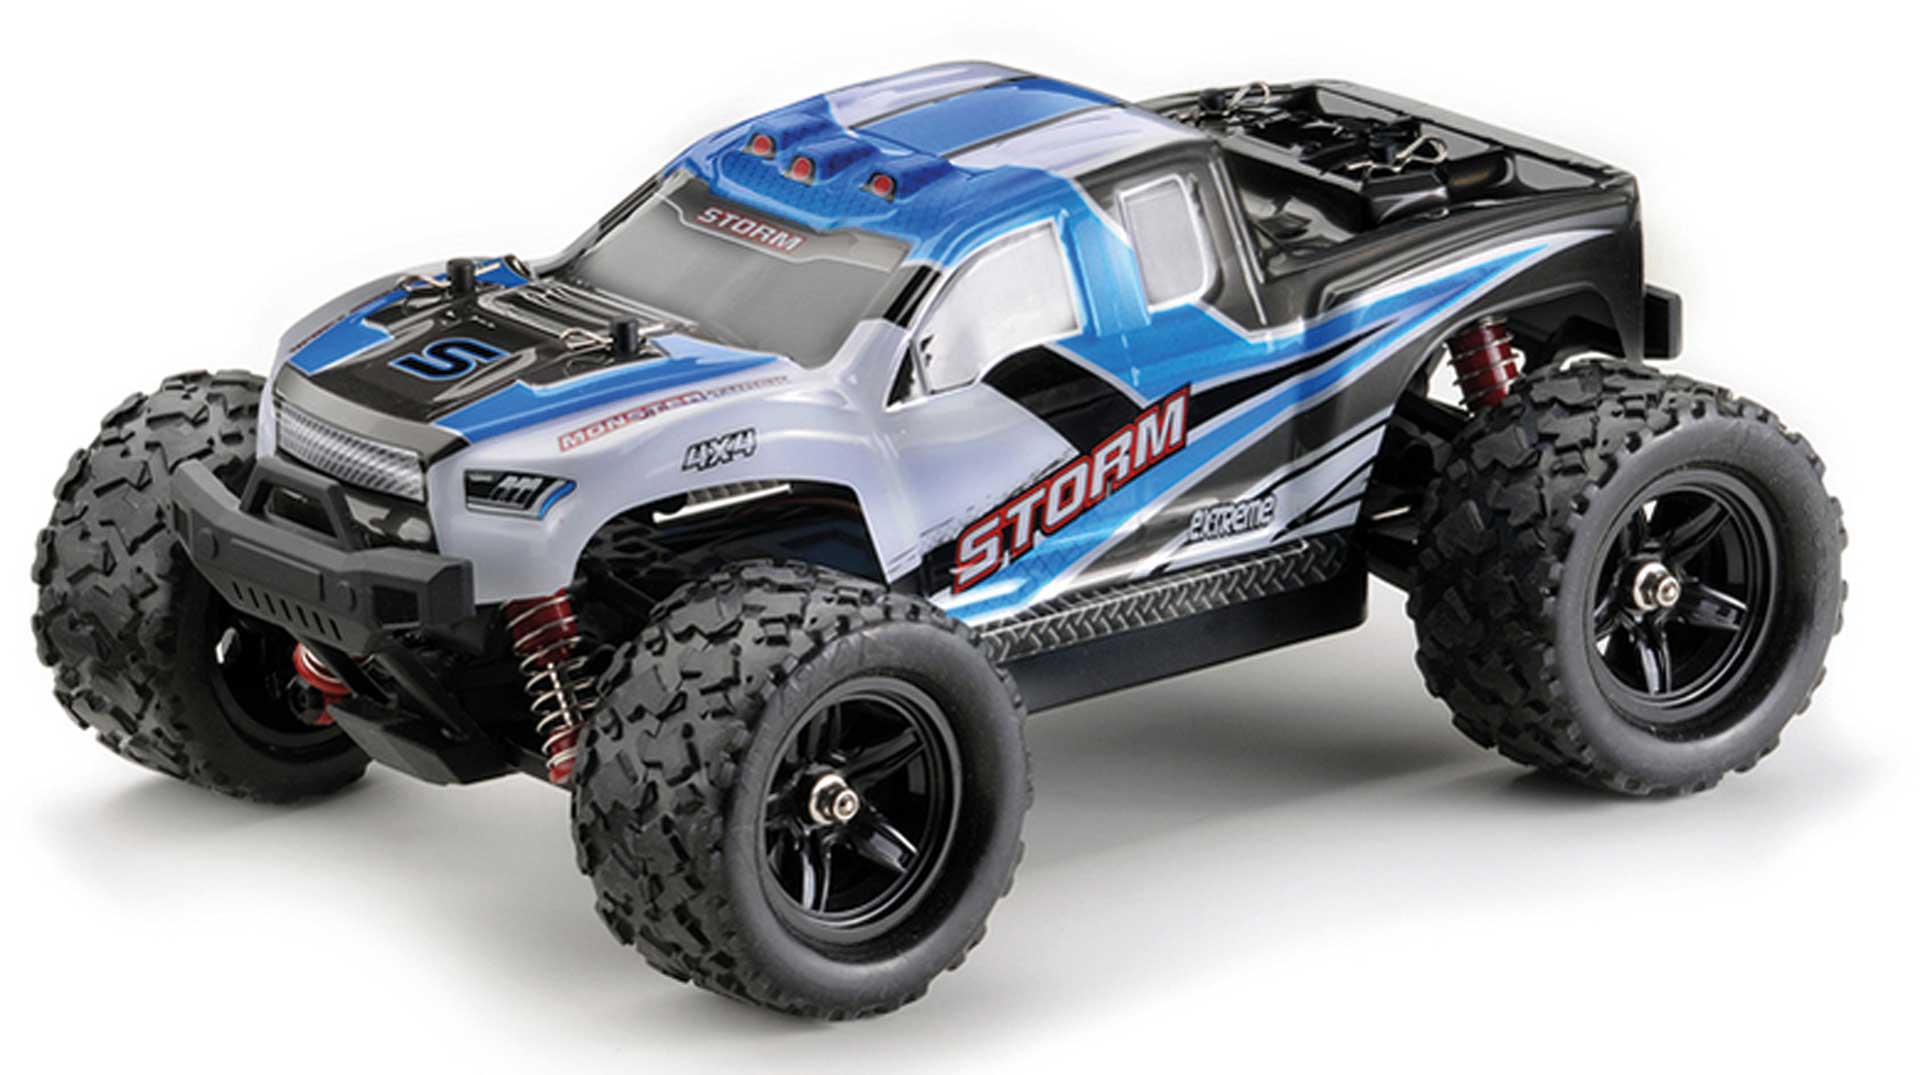 ABSIMA HIGH SPEED MONSTER TRUCK "STORM" BLAU 4WD RTR 1/18